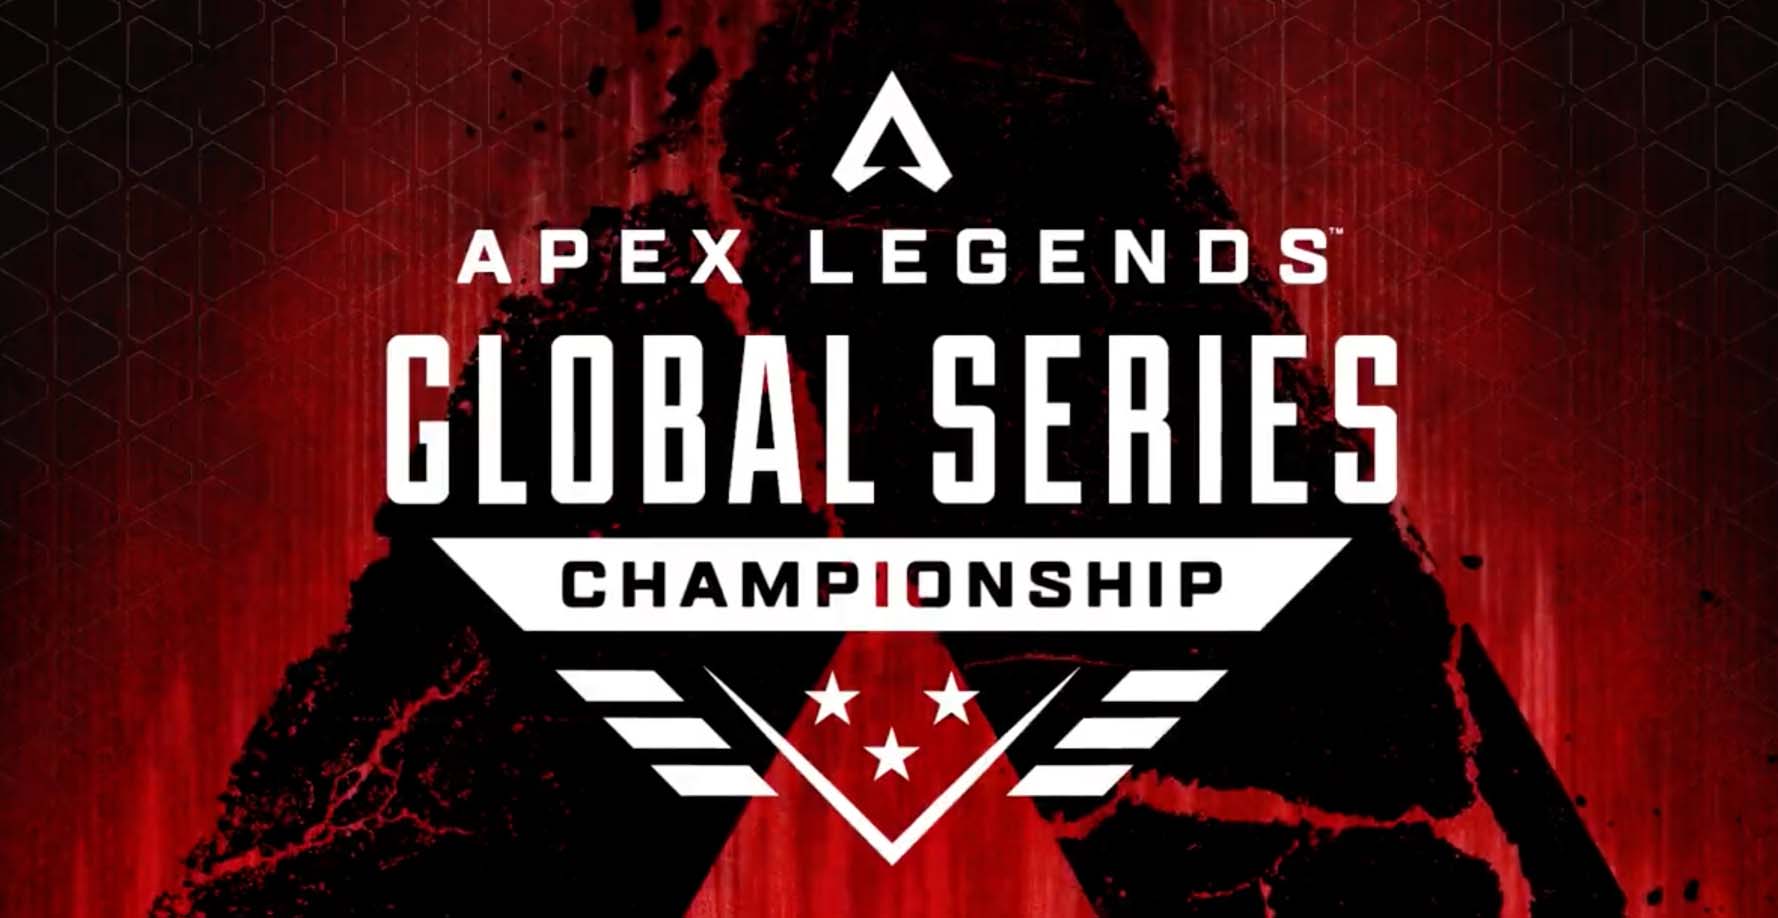 Apex Legends Global Championship Series to be played in North Carolina